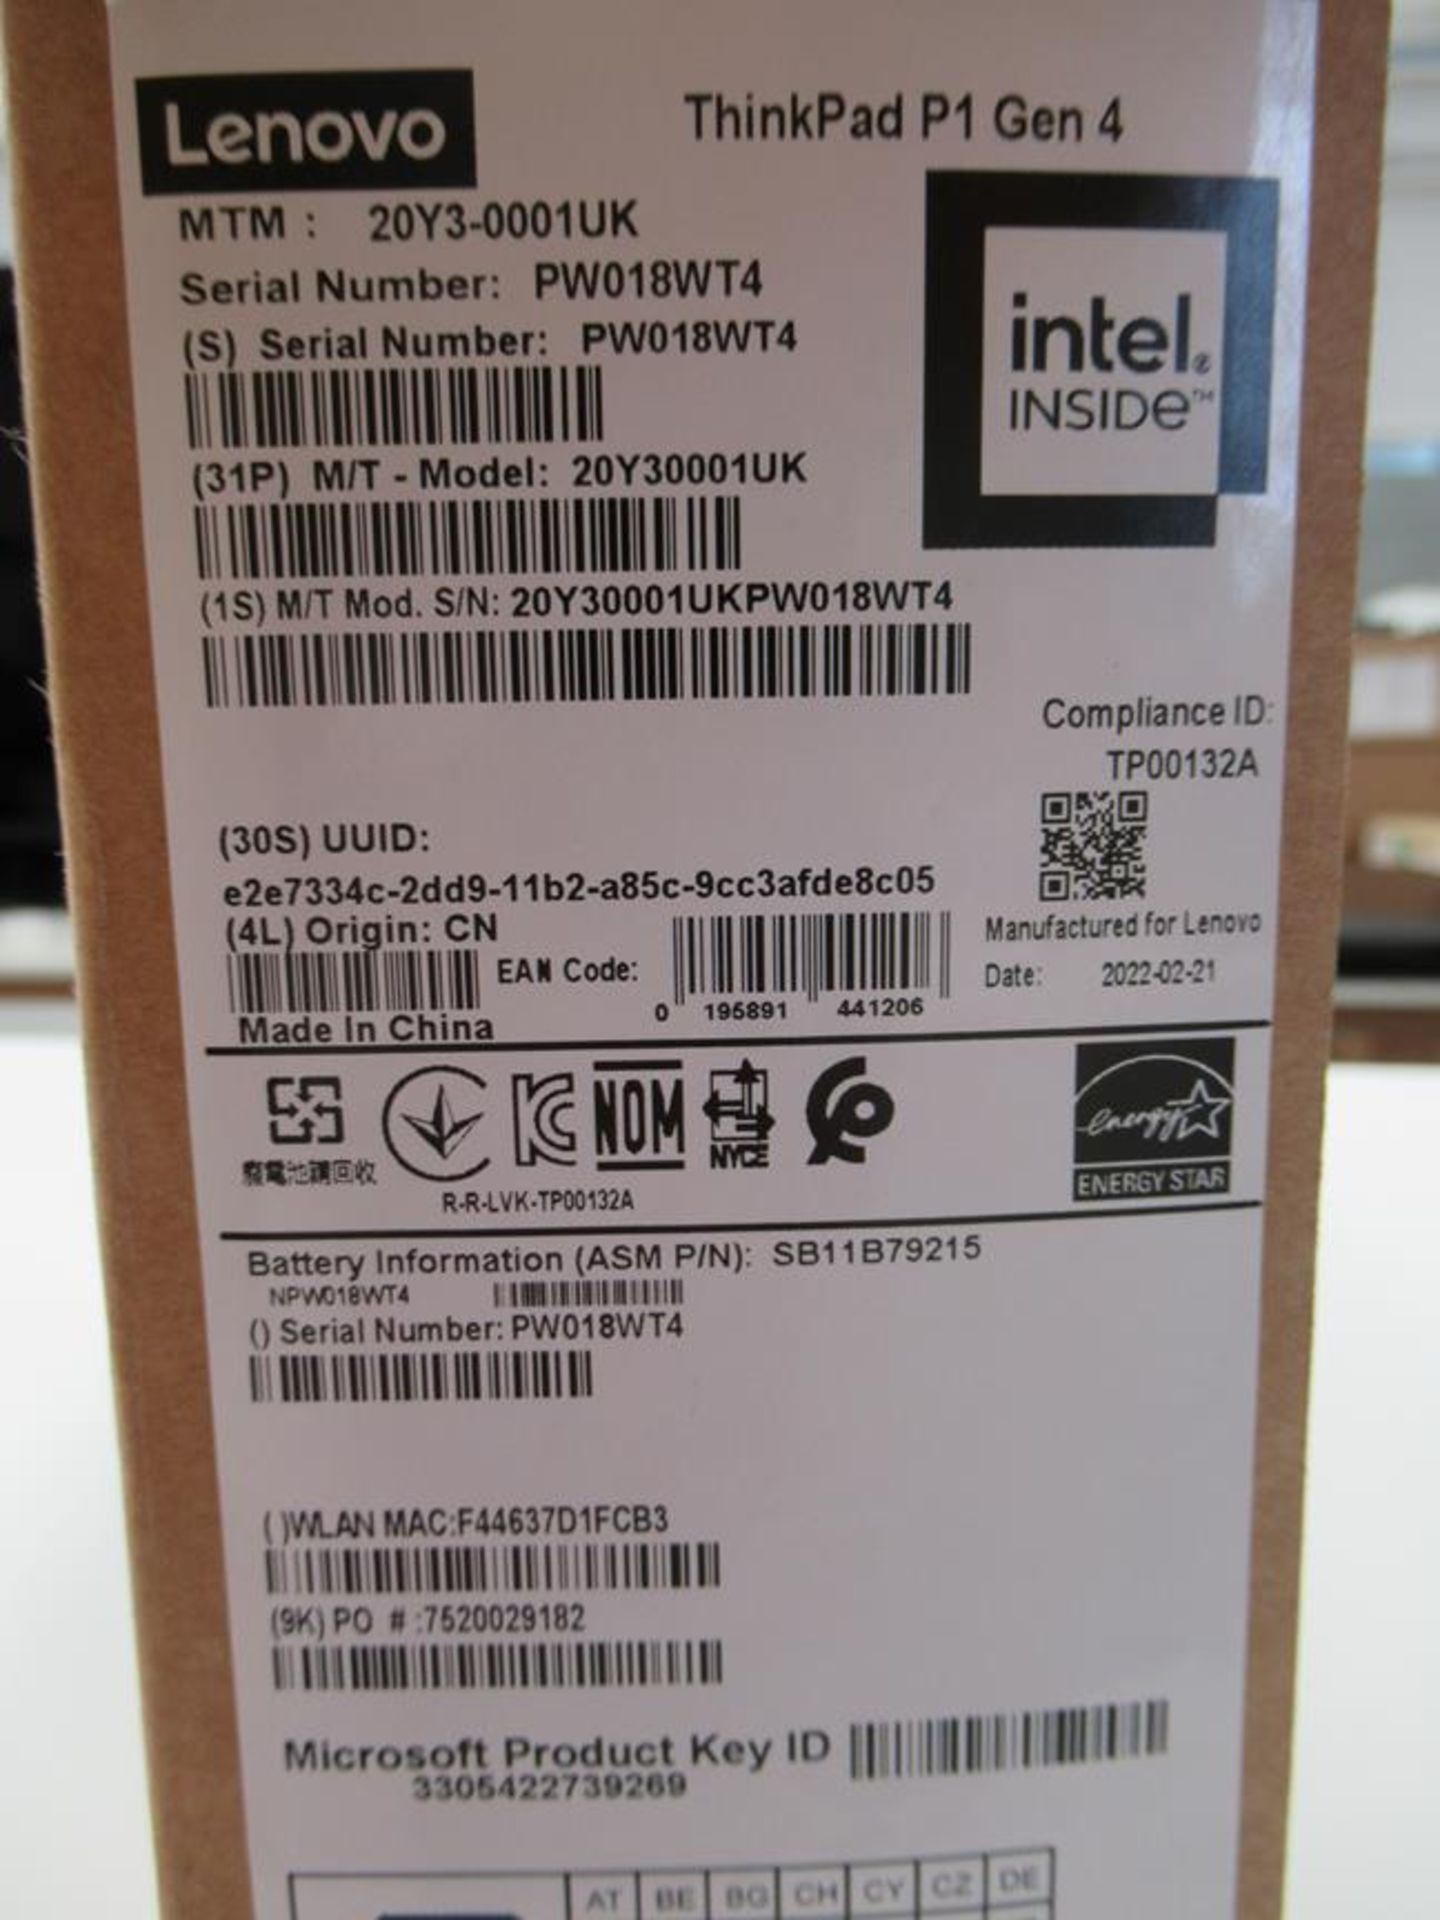 Lenovo, Thinkpad P1 Gen 4 CAD specification (boxed) - Image 3 of 4